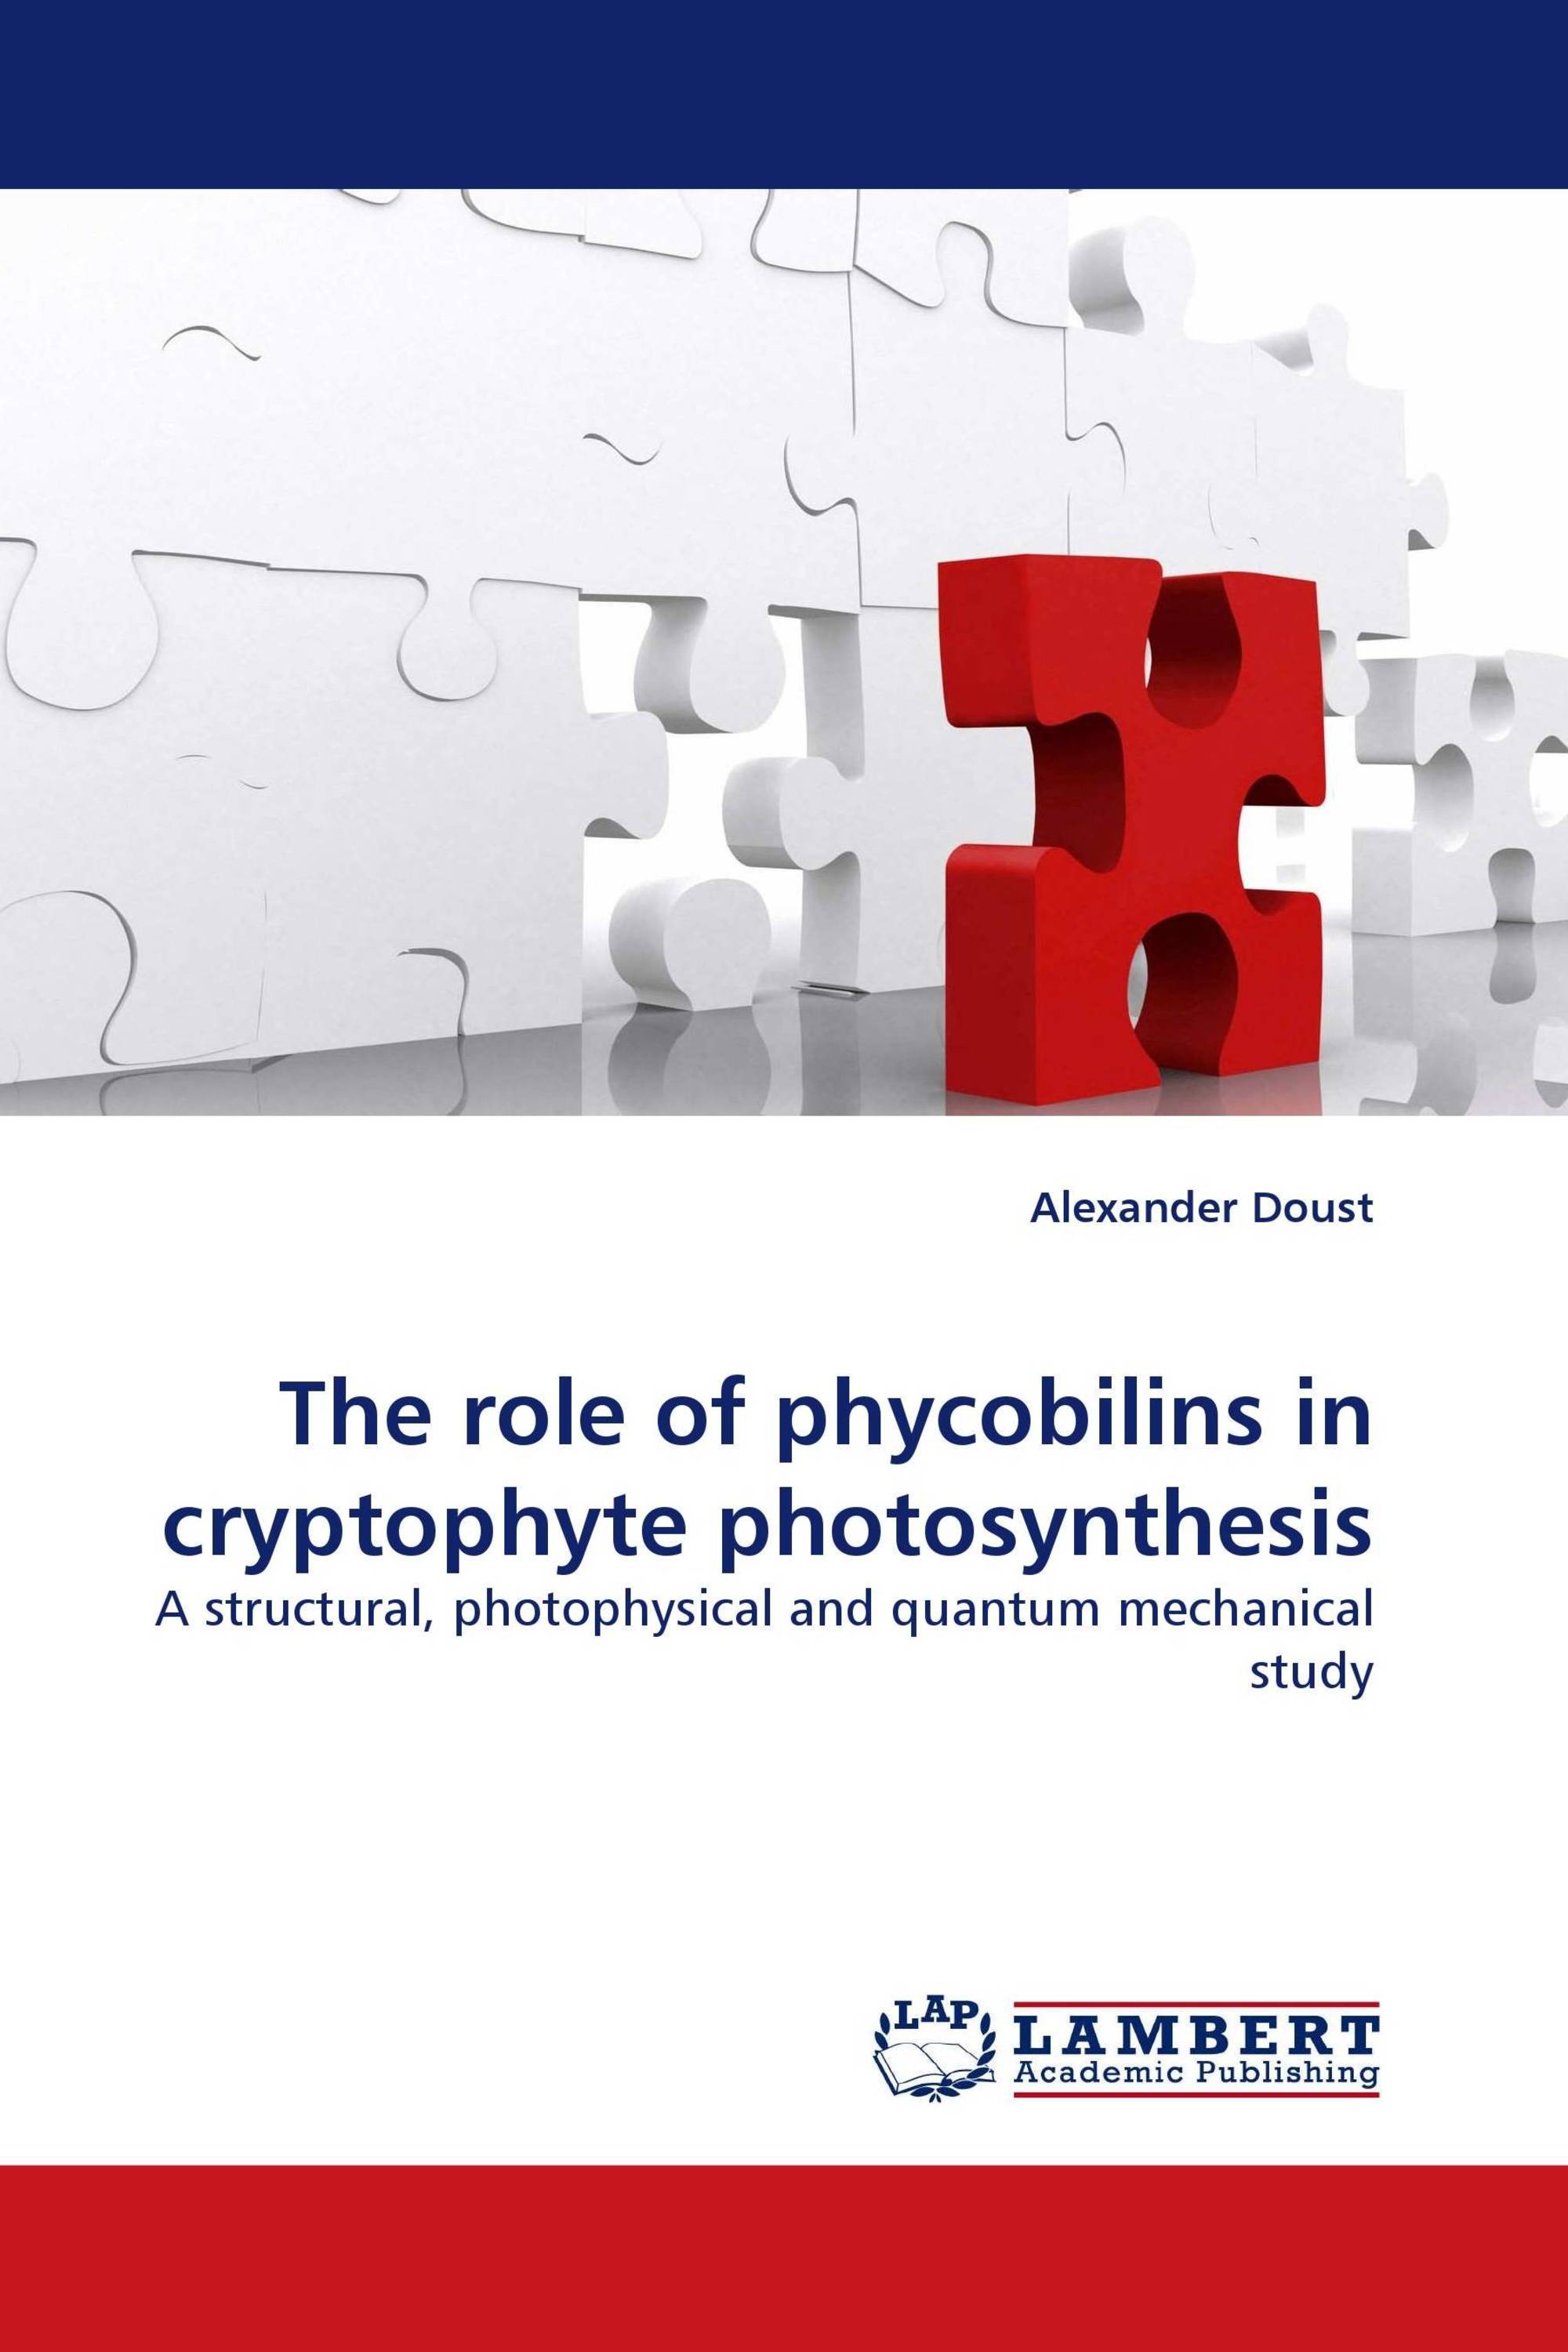 The role of phycobilins in cryptophyte photosynthesis